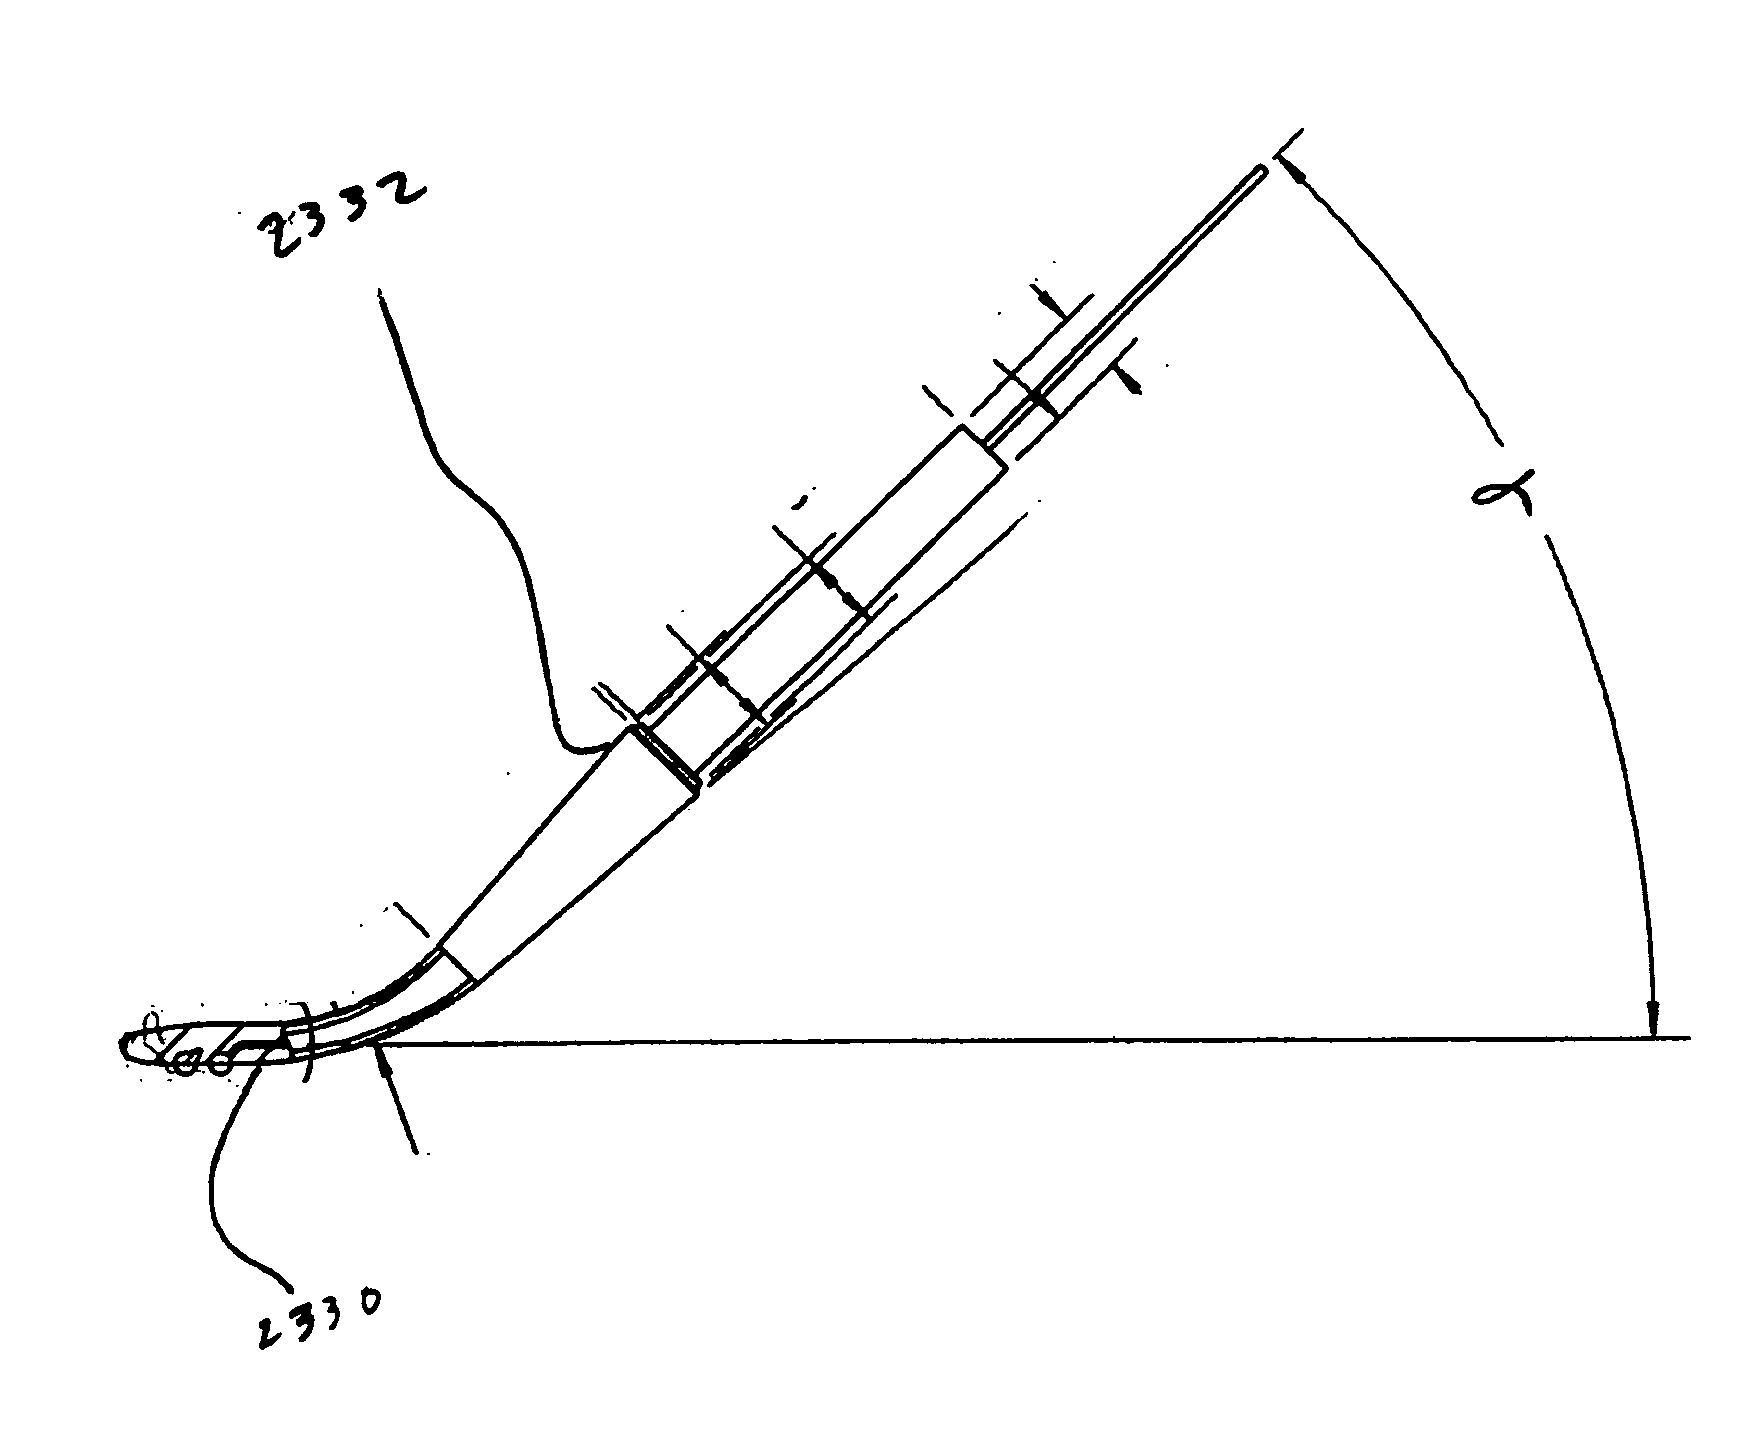 Methods and apparatus for treating back pain